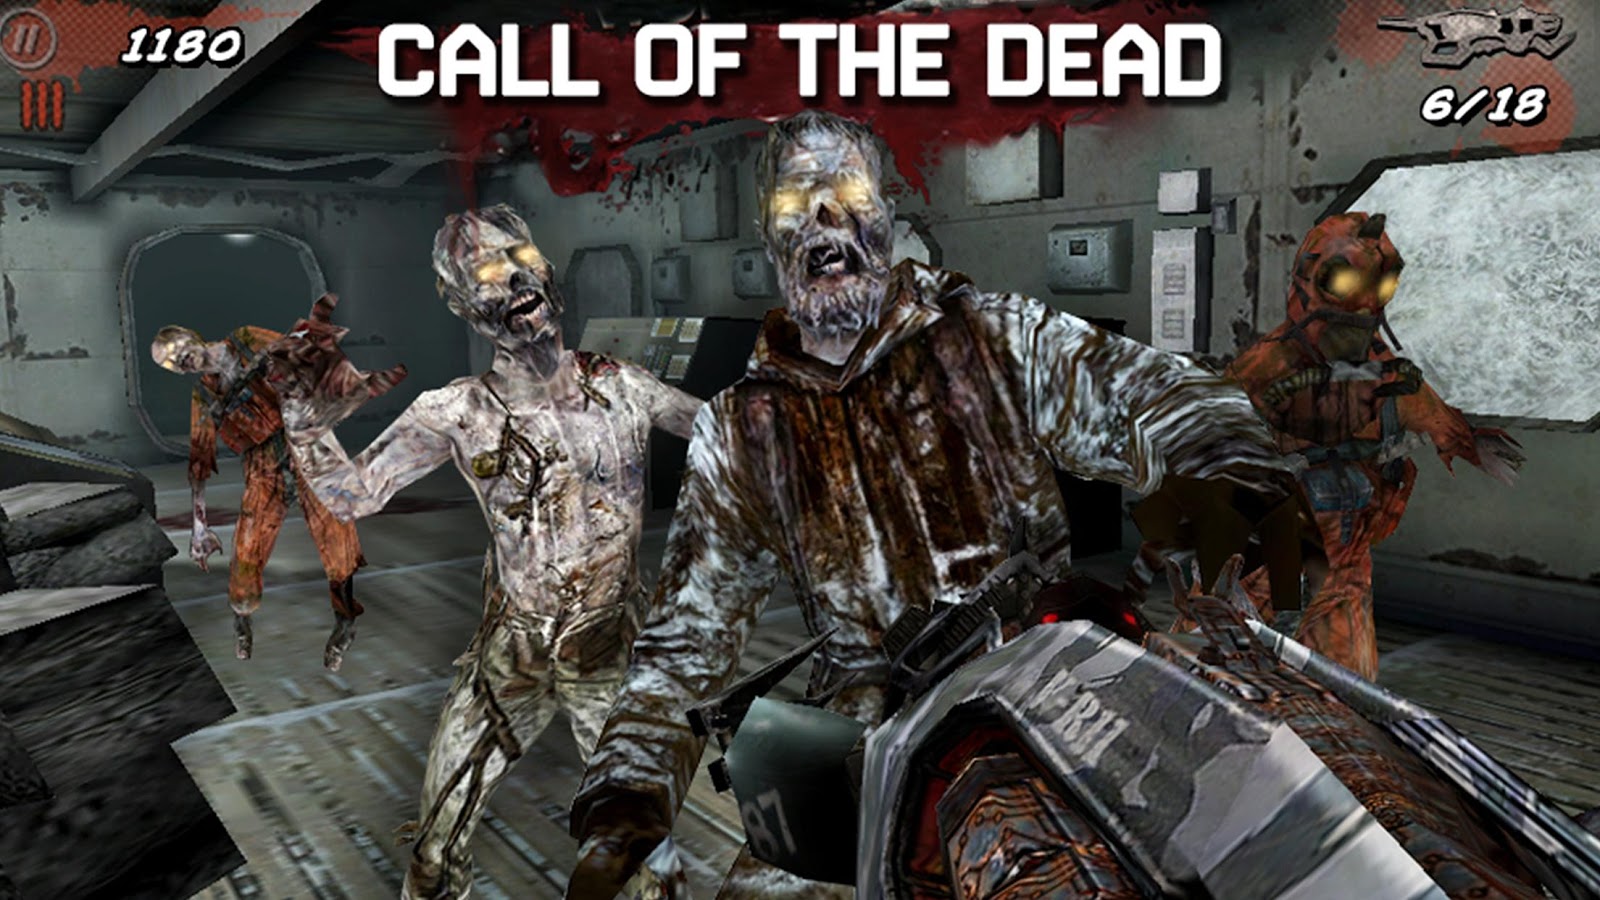 Call of Duty:Black Ops Zombies (Mod Money)